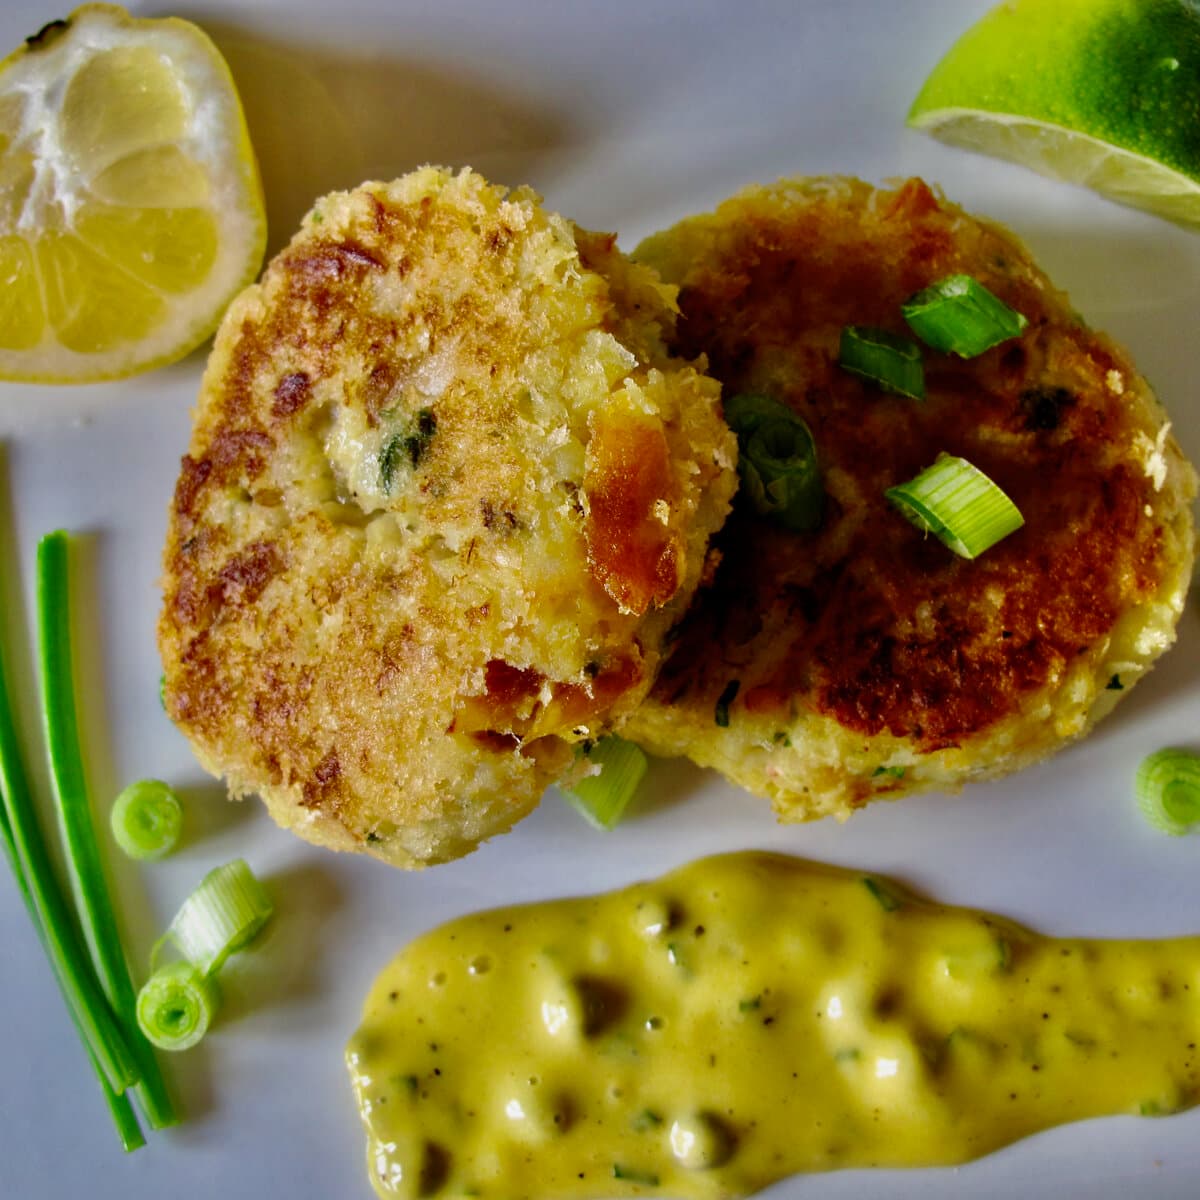 fishcakes with tartare sauce, topped with chives and lemon wedges